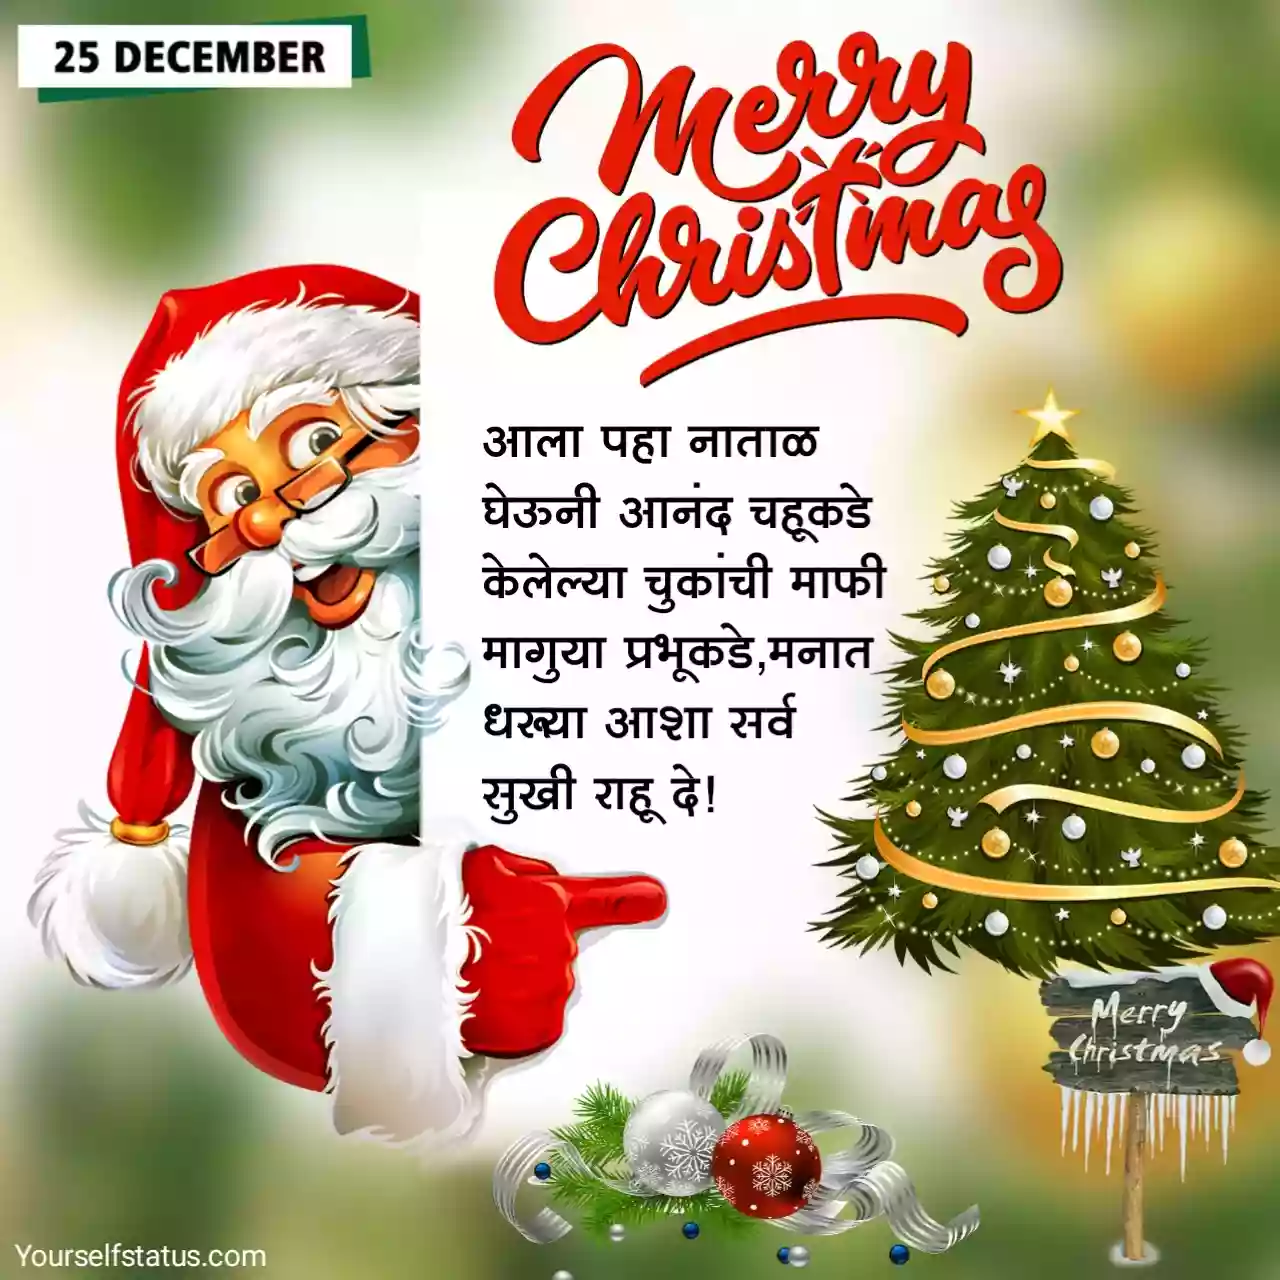 Merry Christmas images in marathi